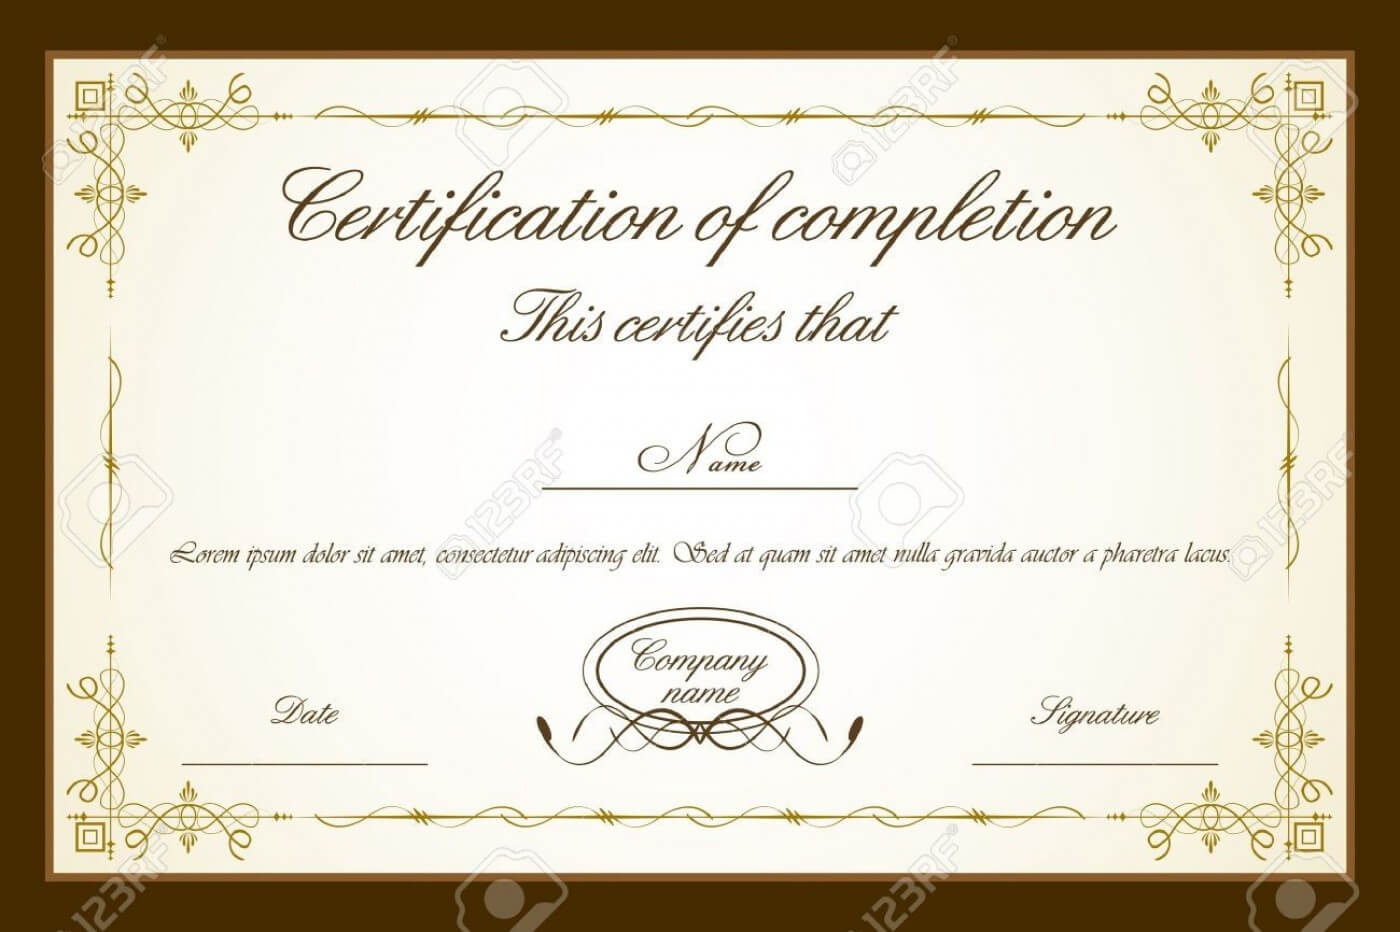 020 Certificates Templates Free Download Certificate Intended For Blank Certificate Templates Free Download